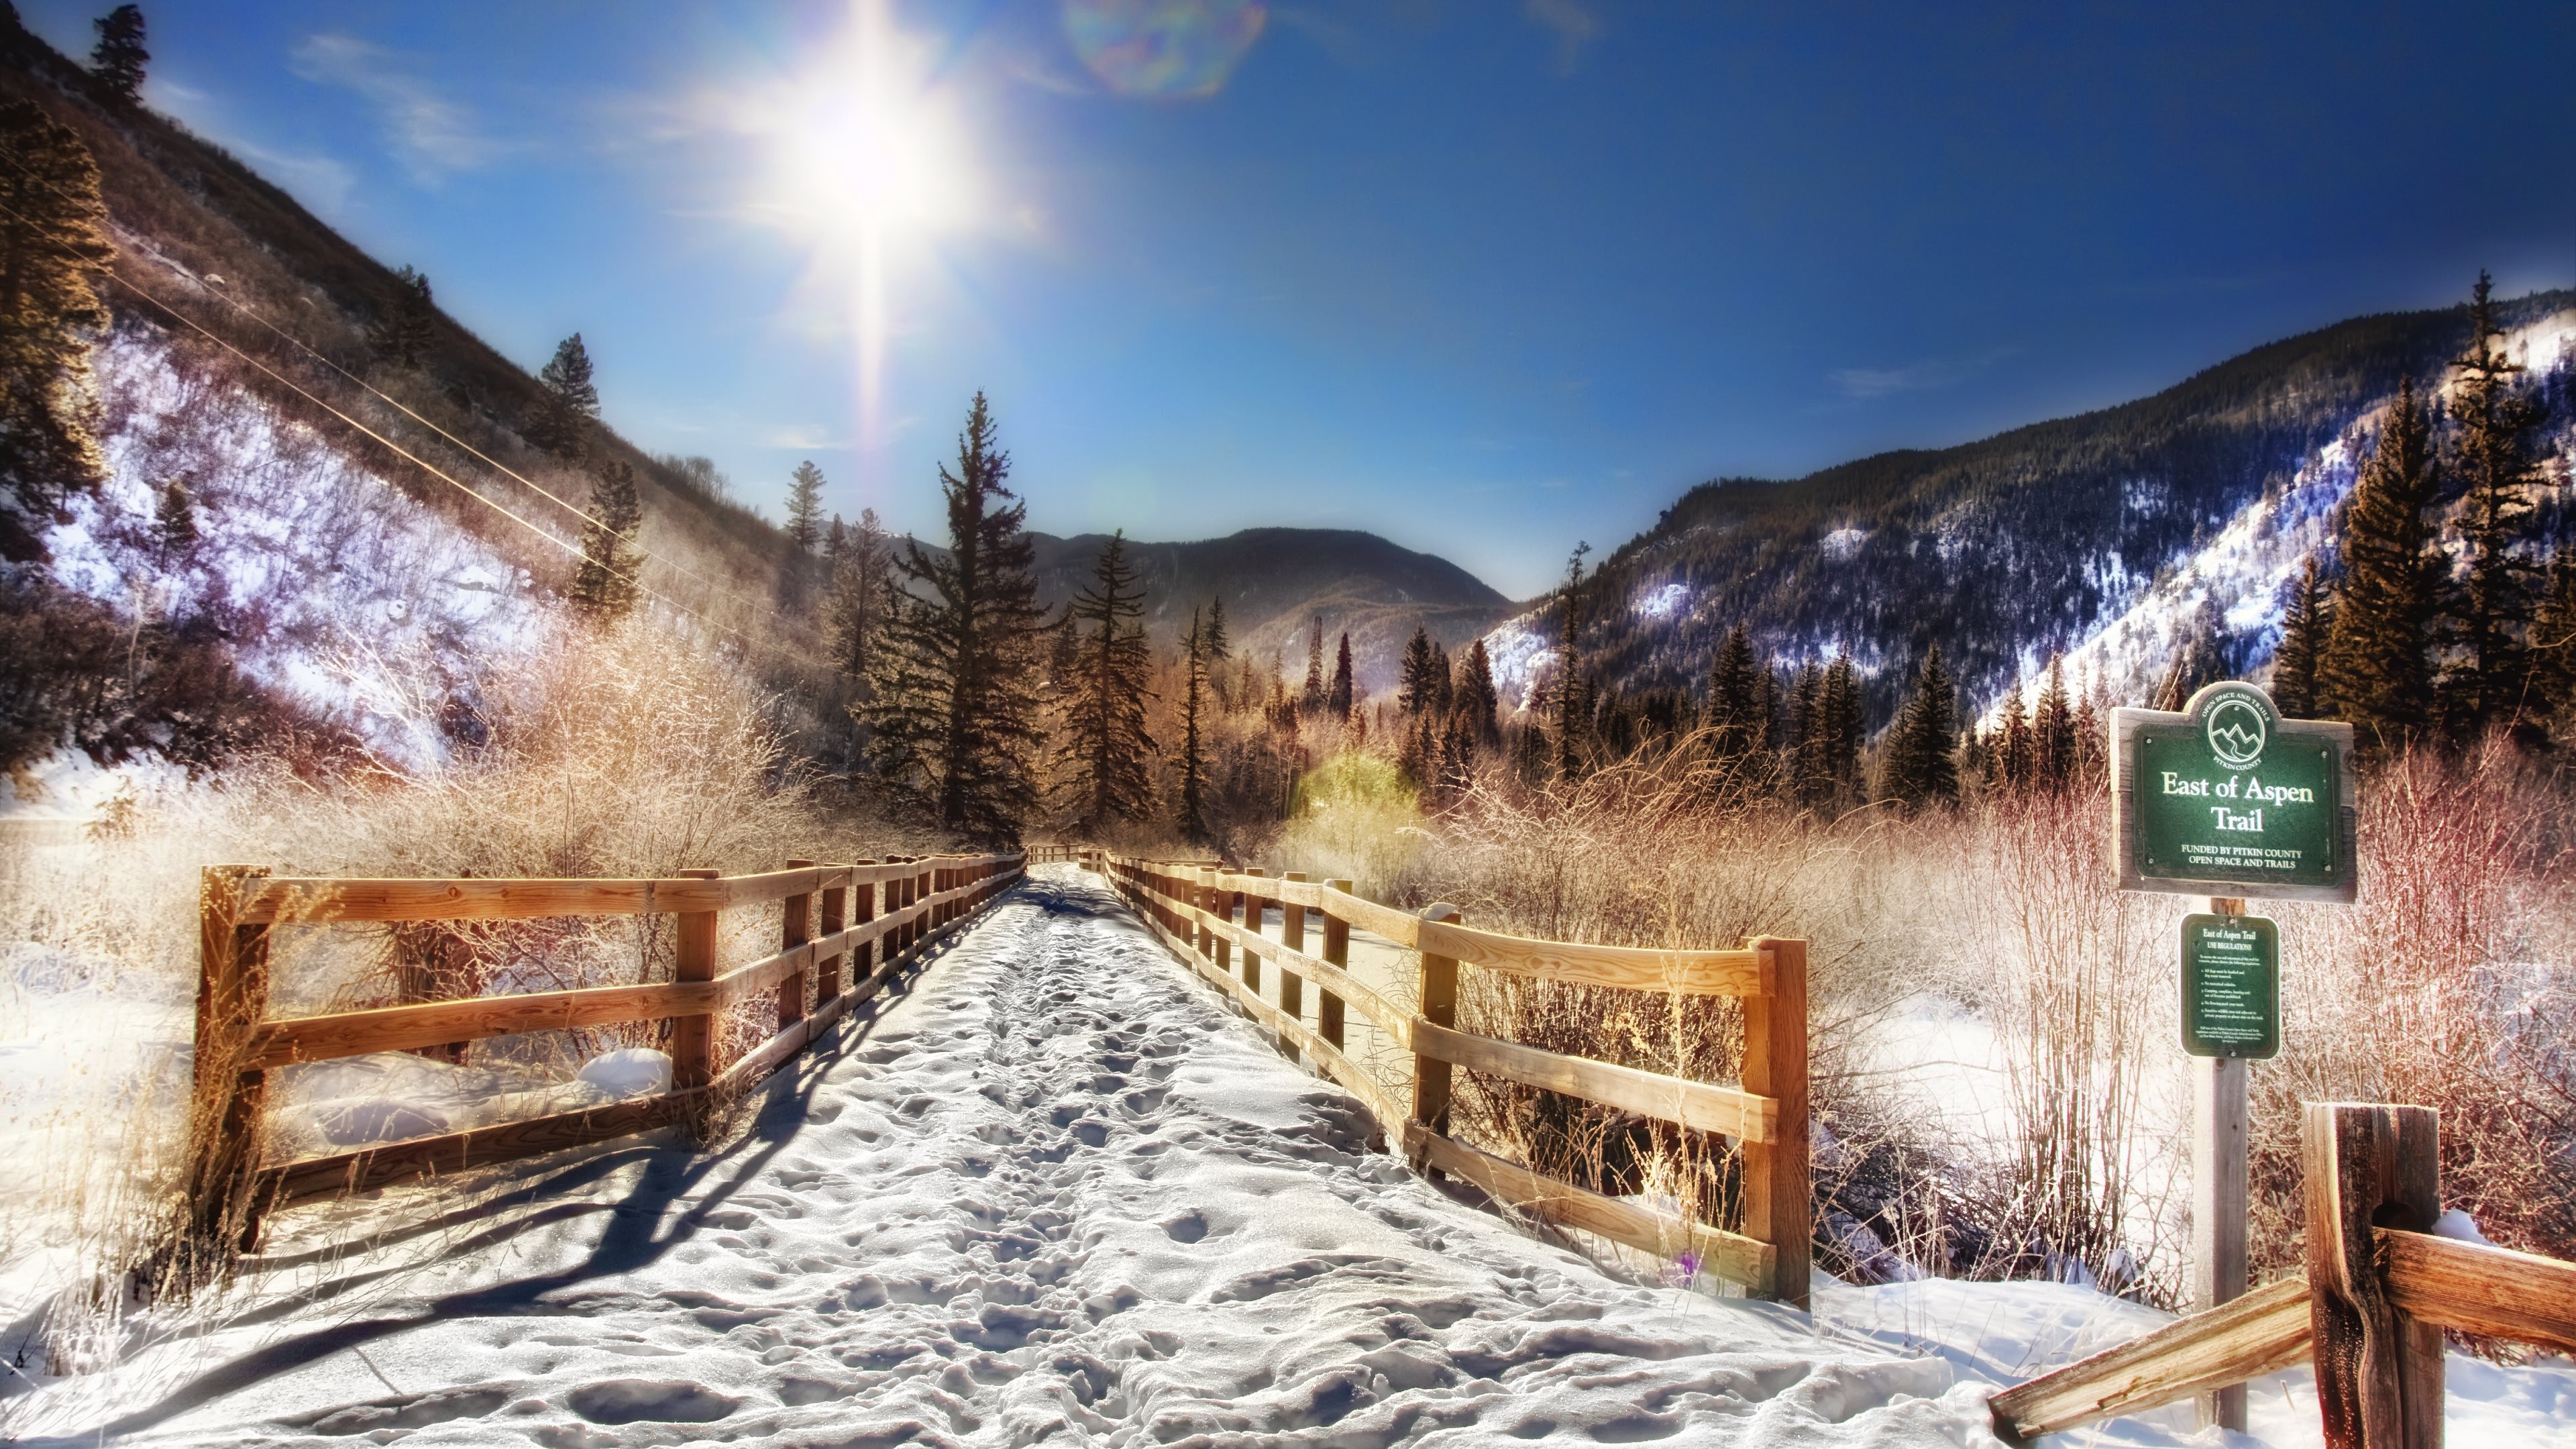 General 3840x2160 nature landscape Aspen snow trees forest sunlight mountains fence Colorado sign USA winter